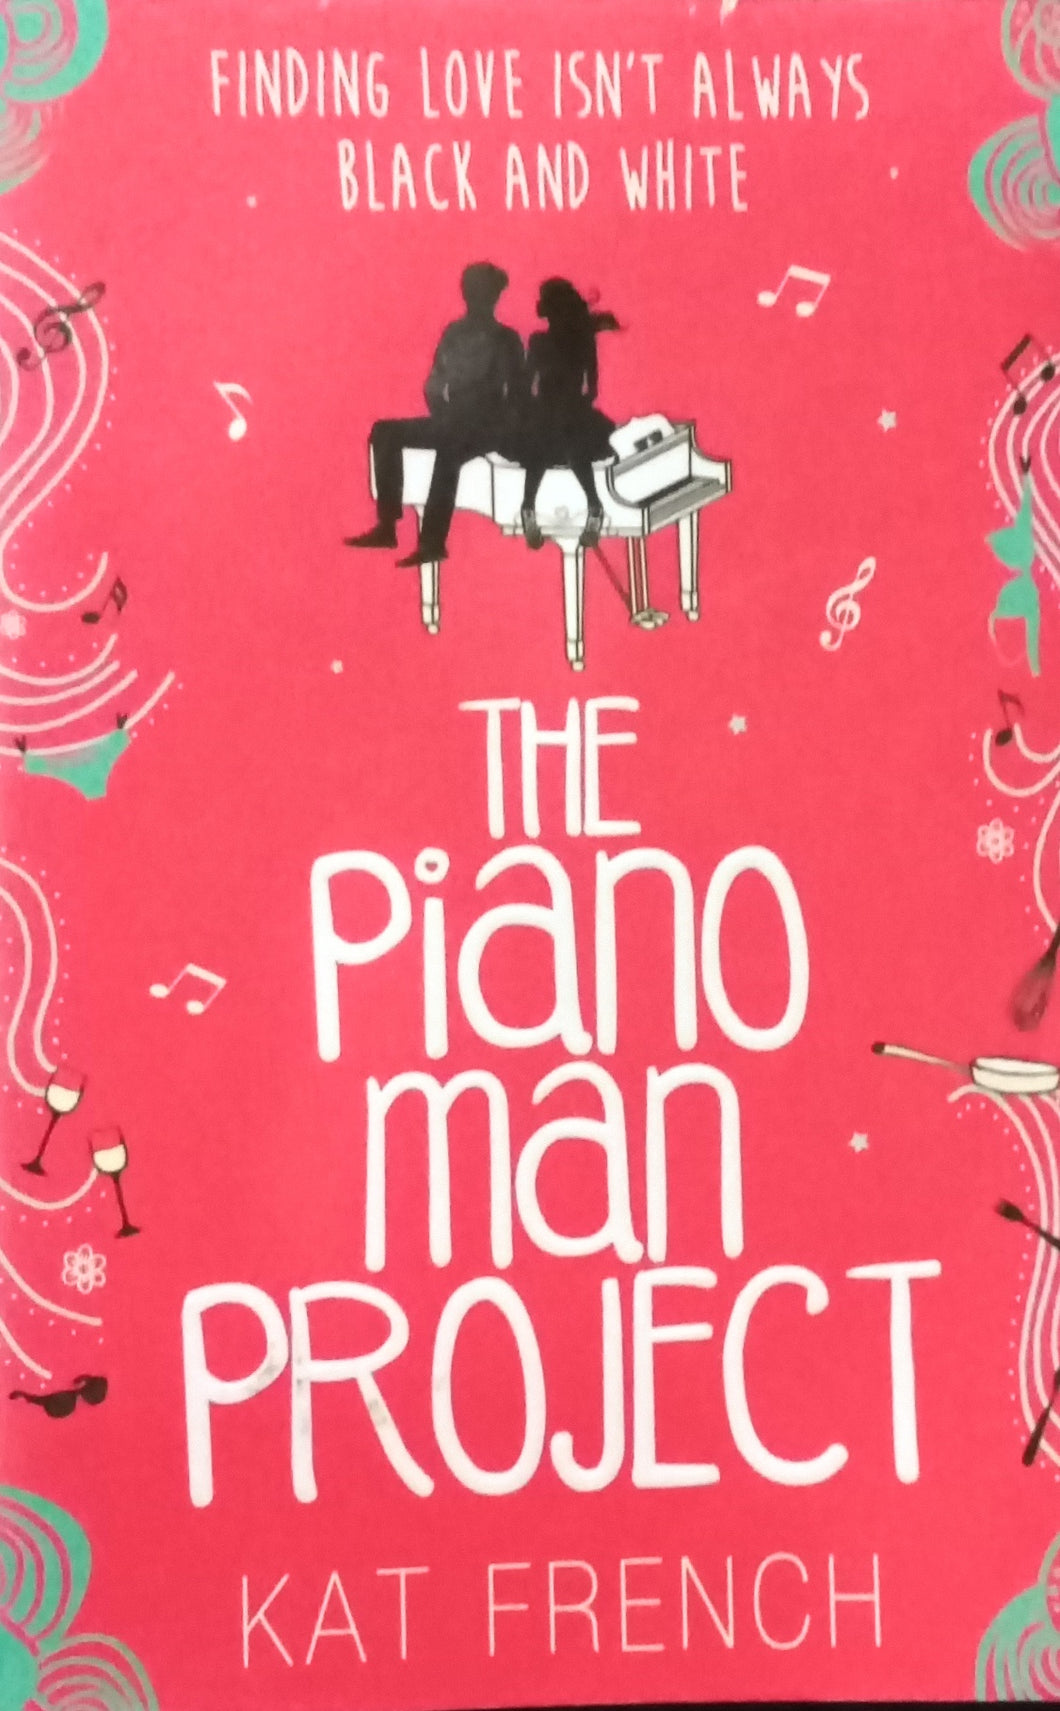 The Piano Man Project by Kat French